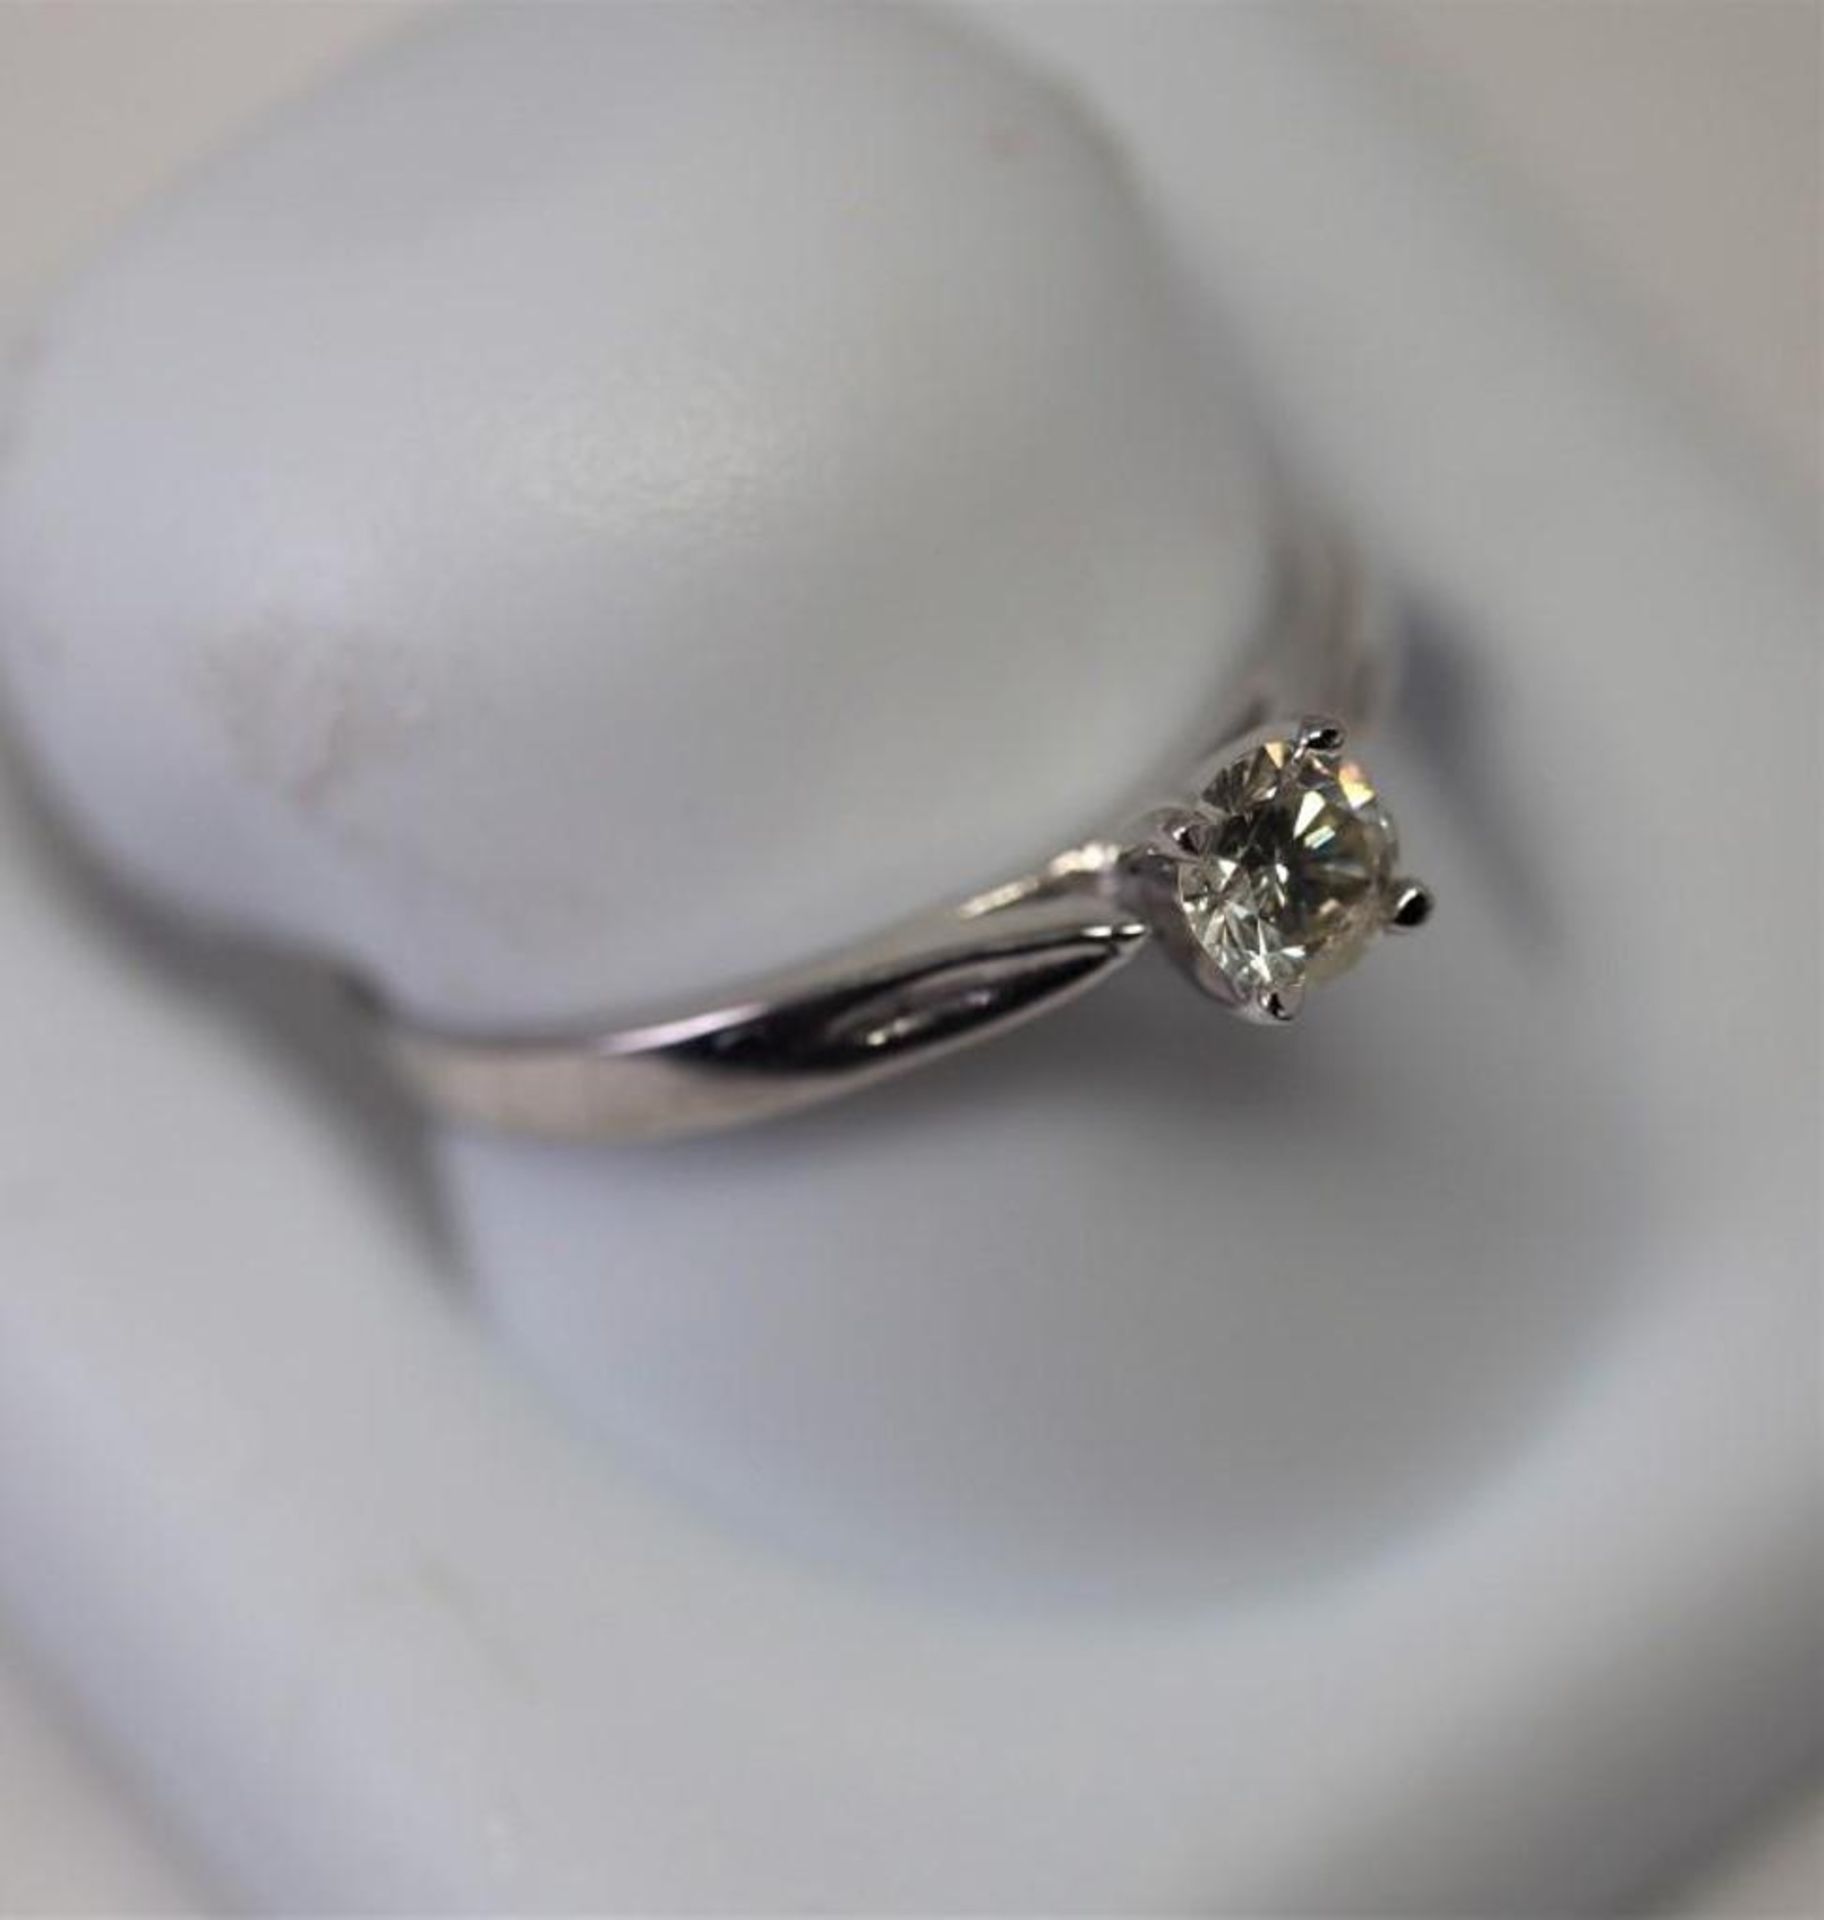 10K White Gold Diamond (0.2Ct) Solitaire Ring Retail $1,600 - Image 2 of 2